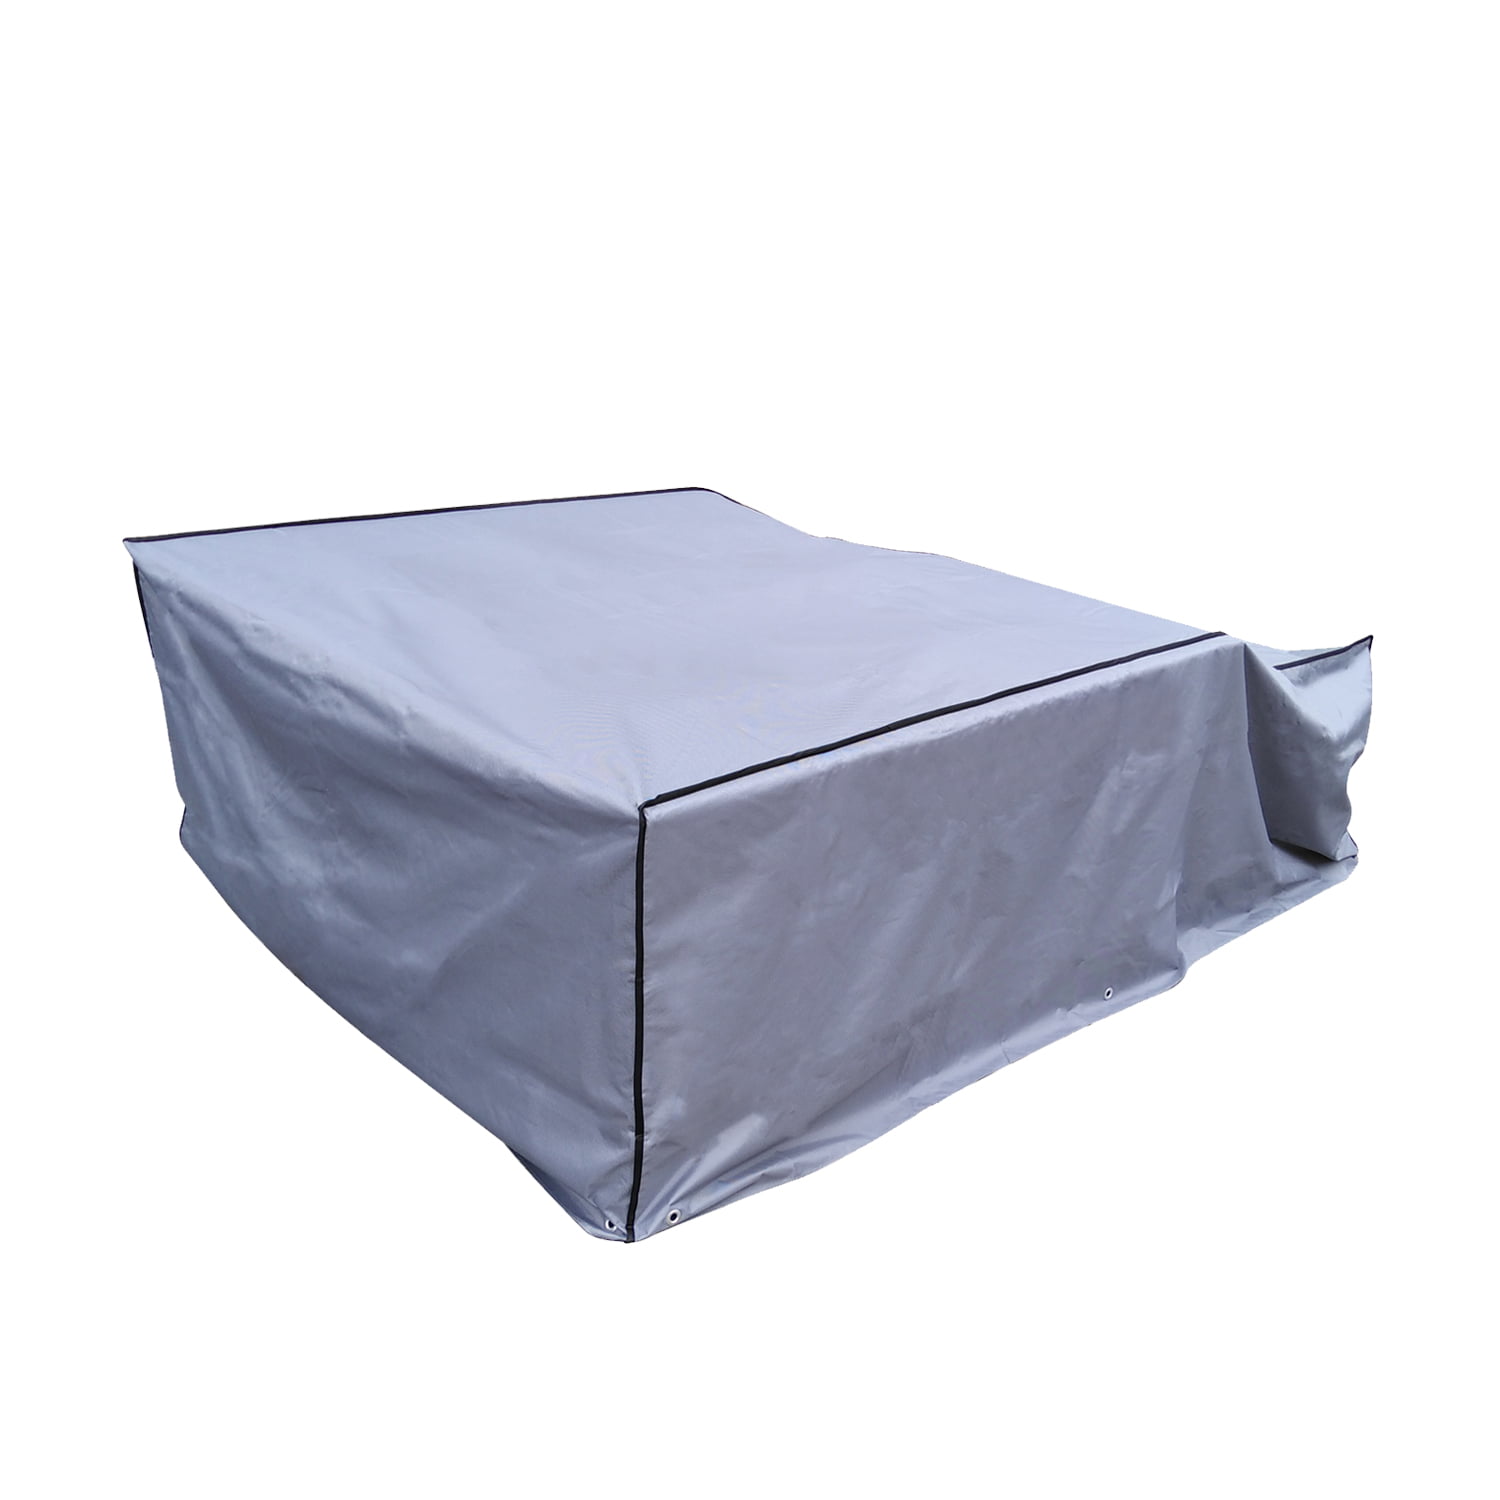 Outdoor Waterproof Cube Furniture Cover Table Chair Protection Garden Patio  SU 